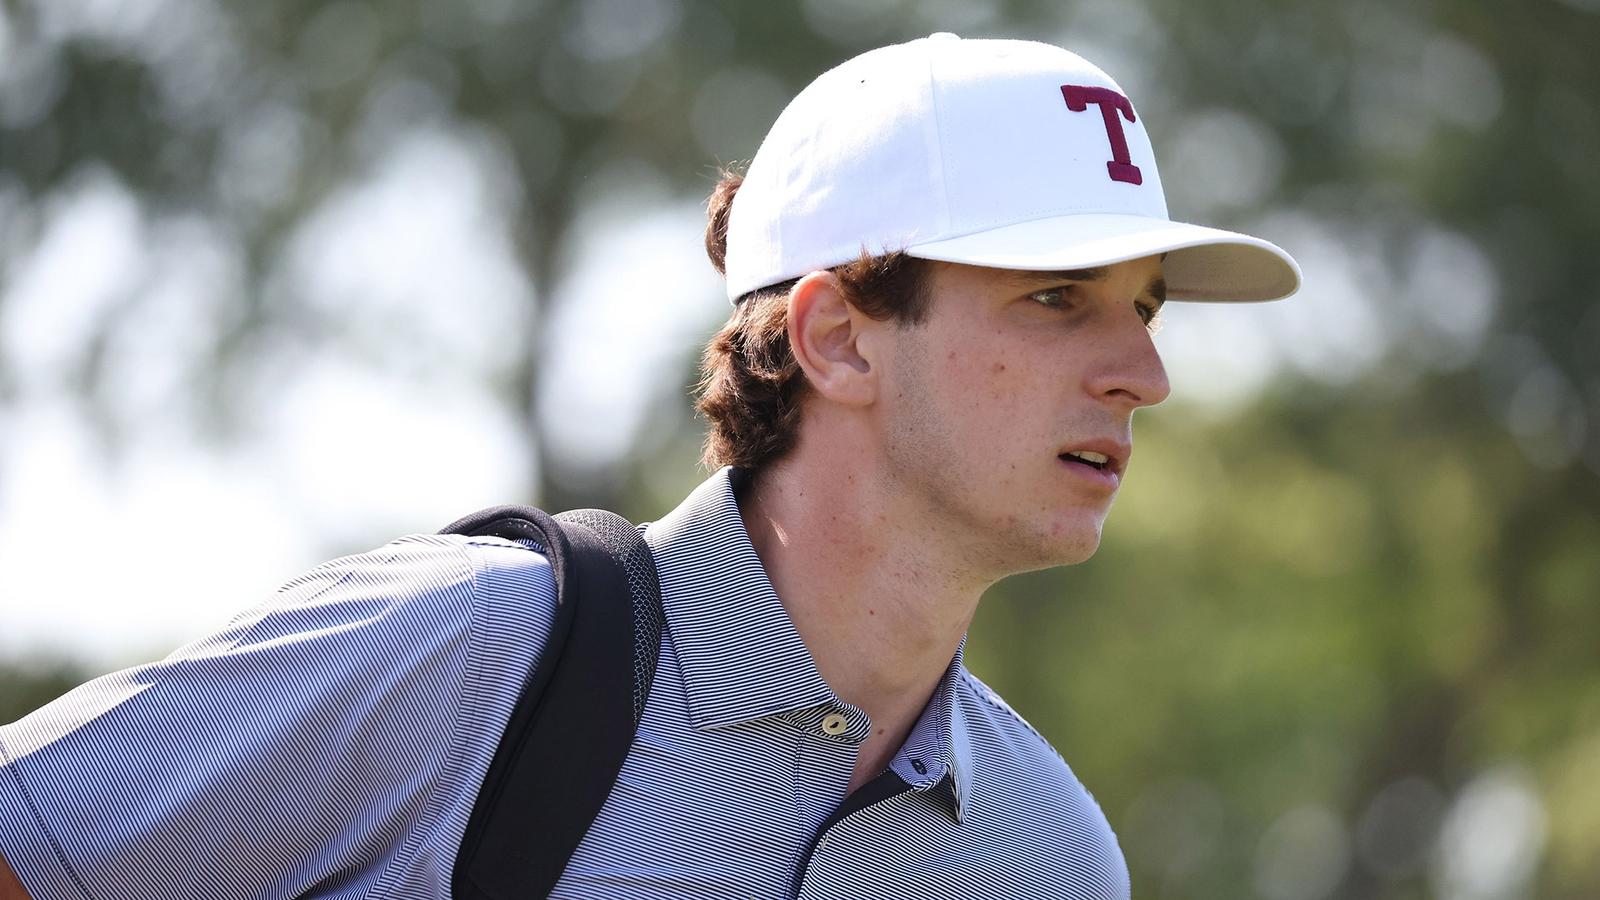 SEC Championship: Rodrigues Climbs to 3rd, Texas A&M Holds 6th Spot